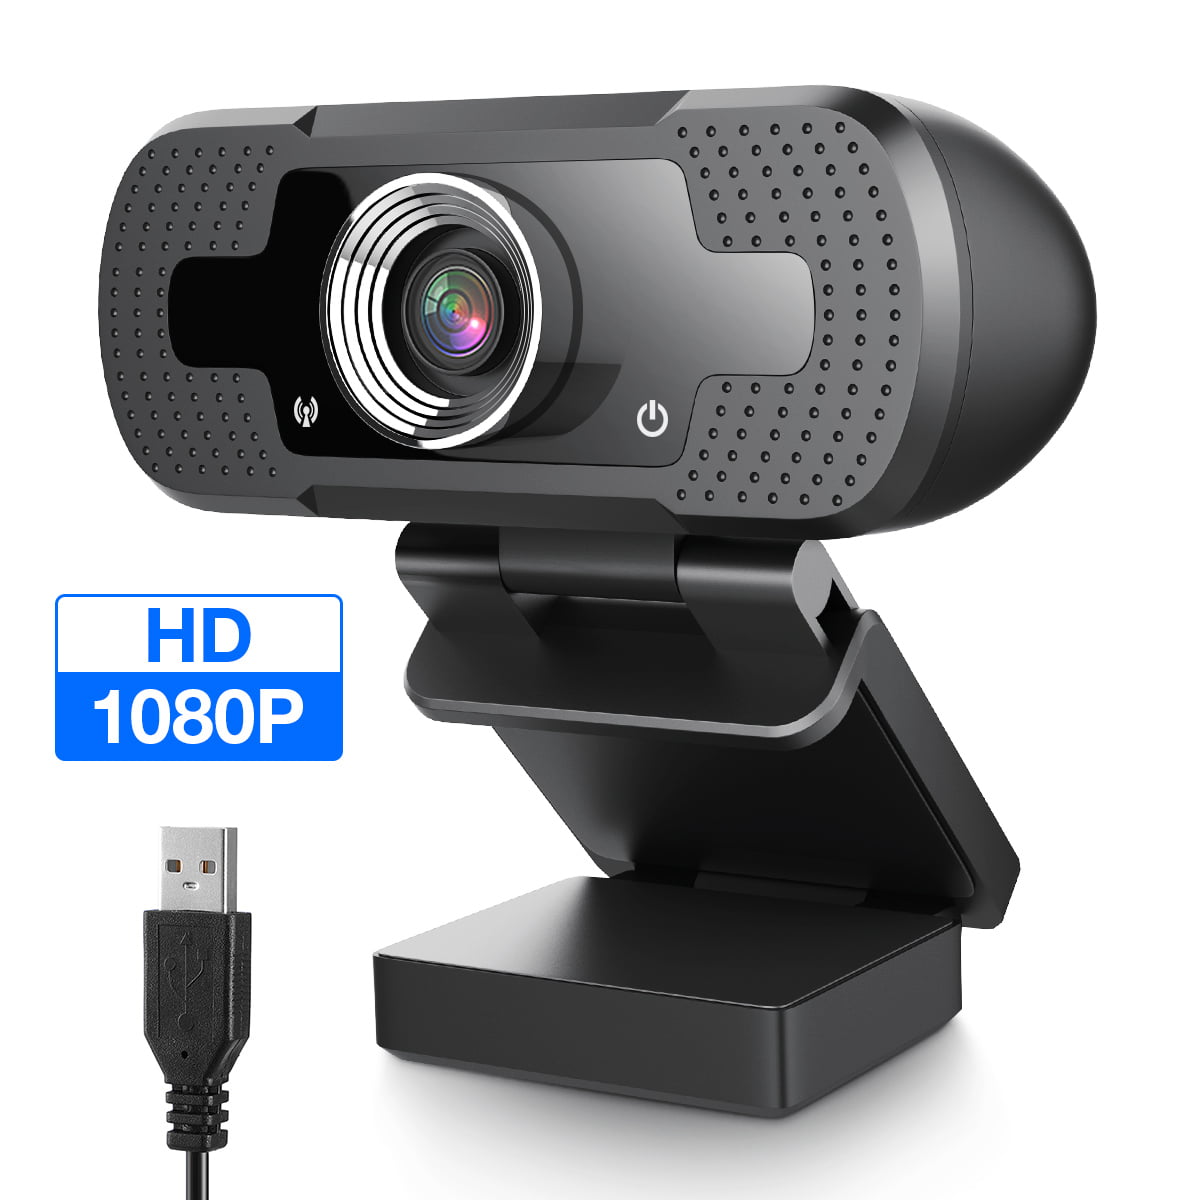 1080P HD Webcam with Microphone Full HD Streaming Web Camera USB PC Camera for Desktop Comupter,Laptop,Gaming,Video,Calling,Conference with Flextible Angle 